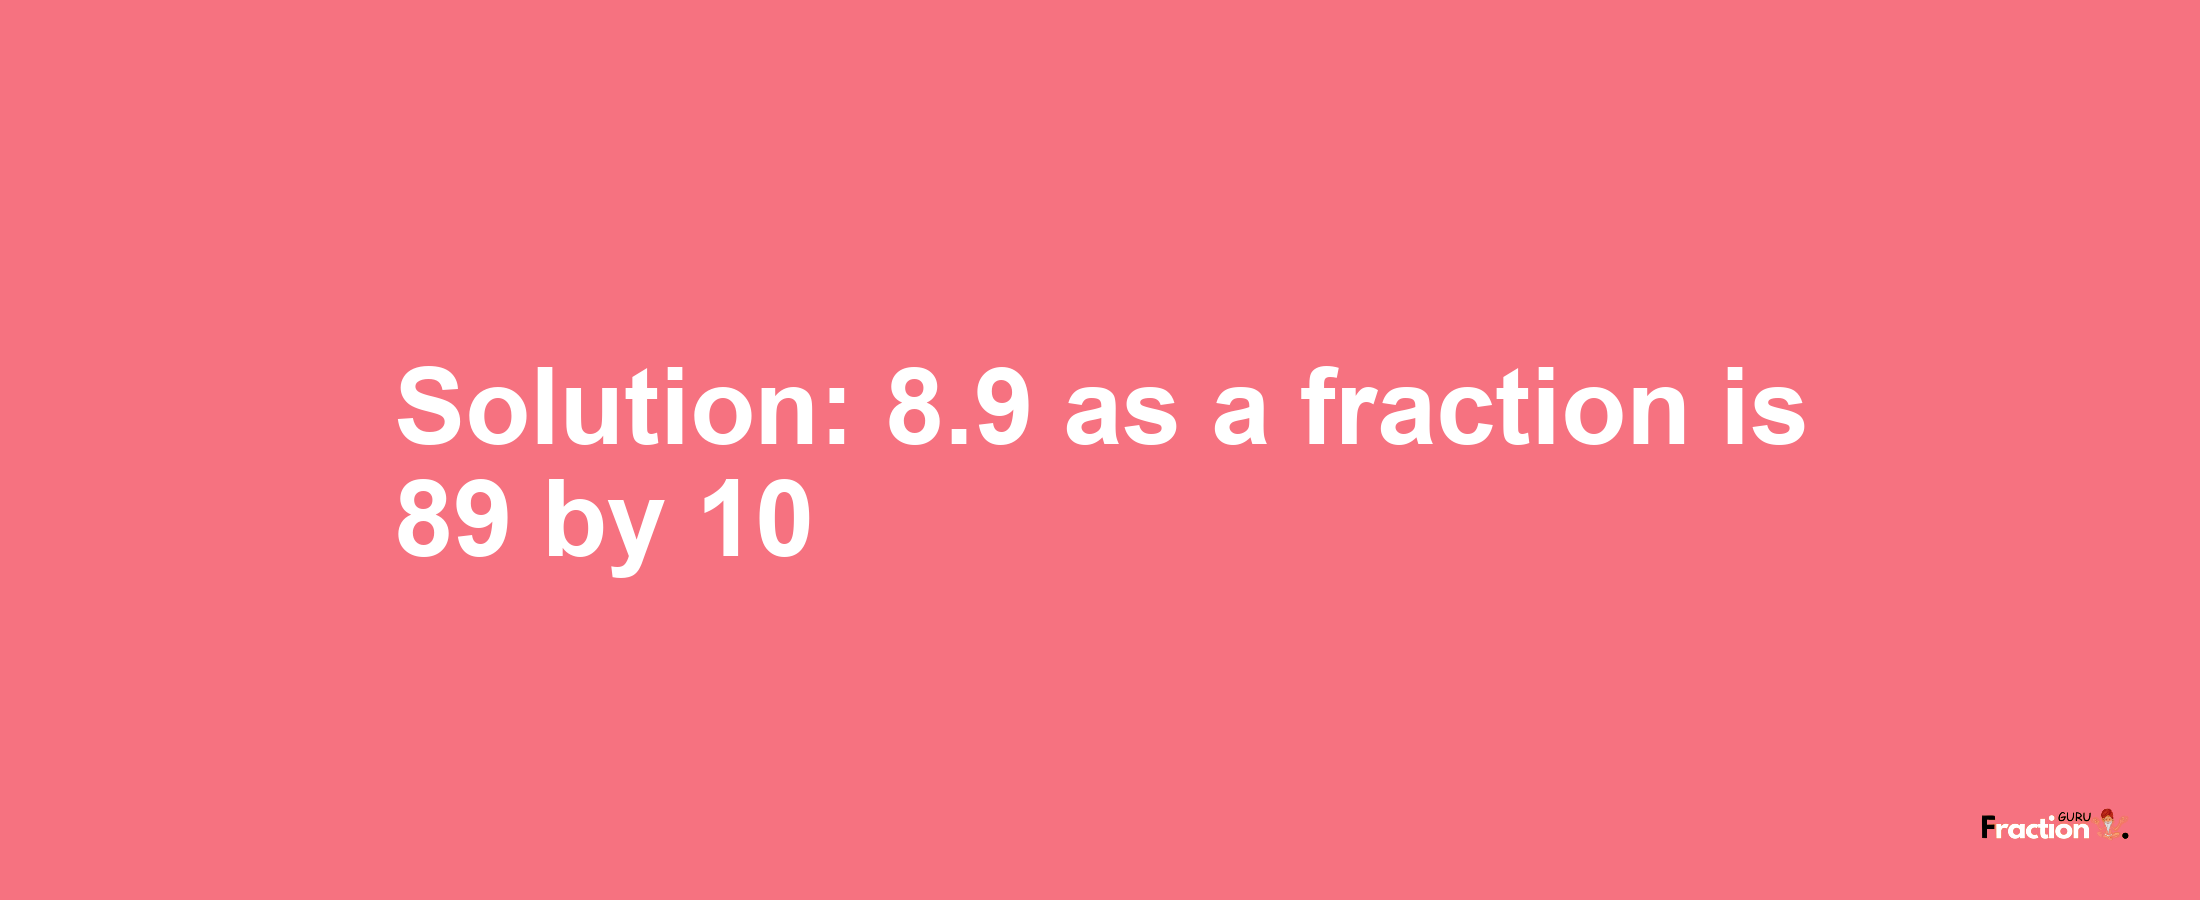 Solution:8.9 as a fraction is 89/10